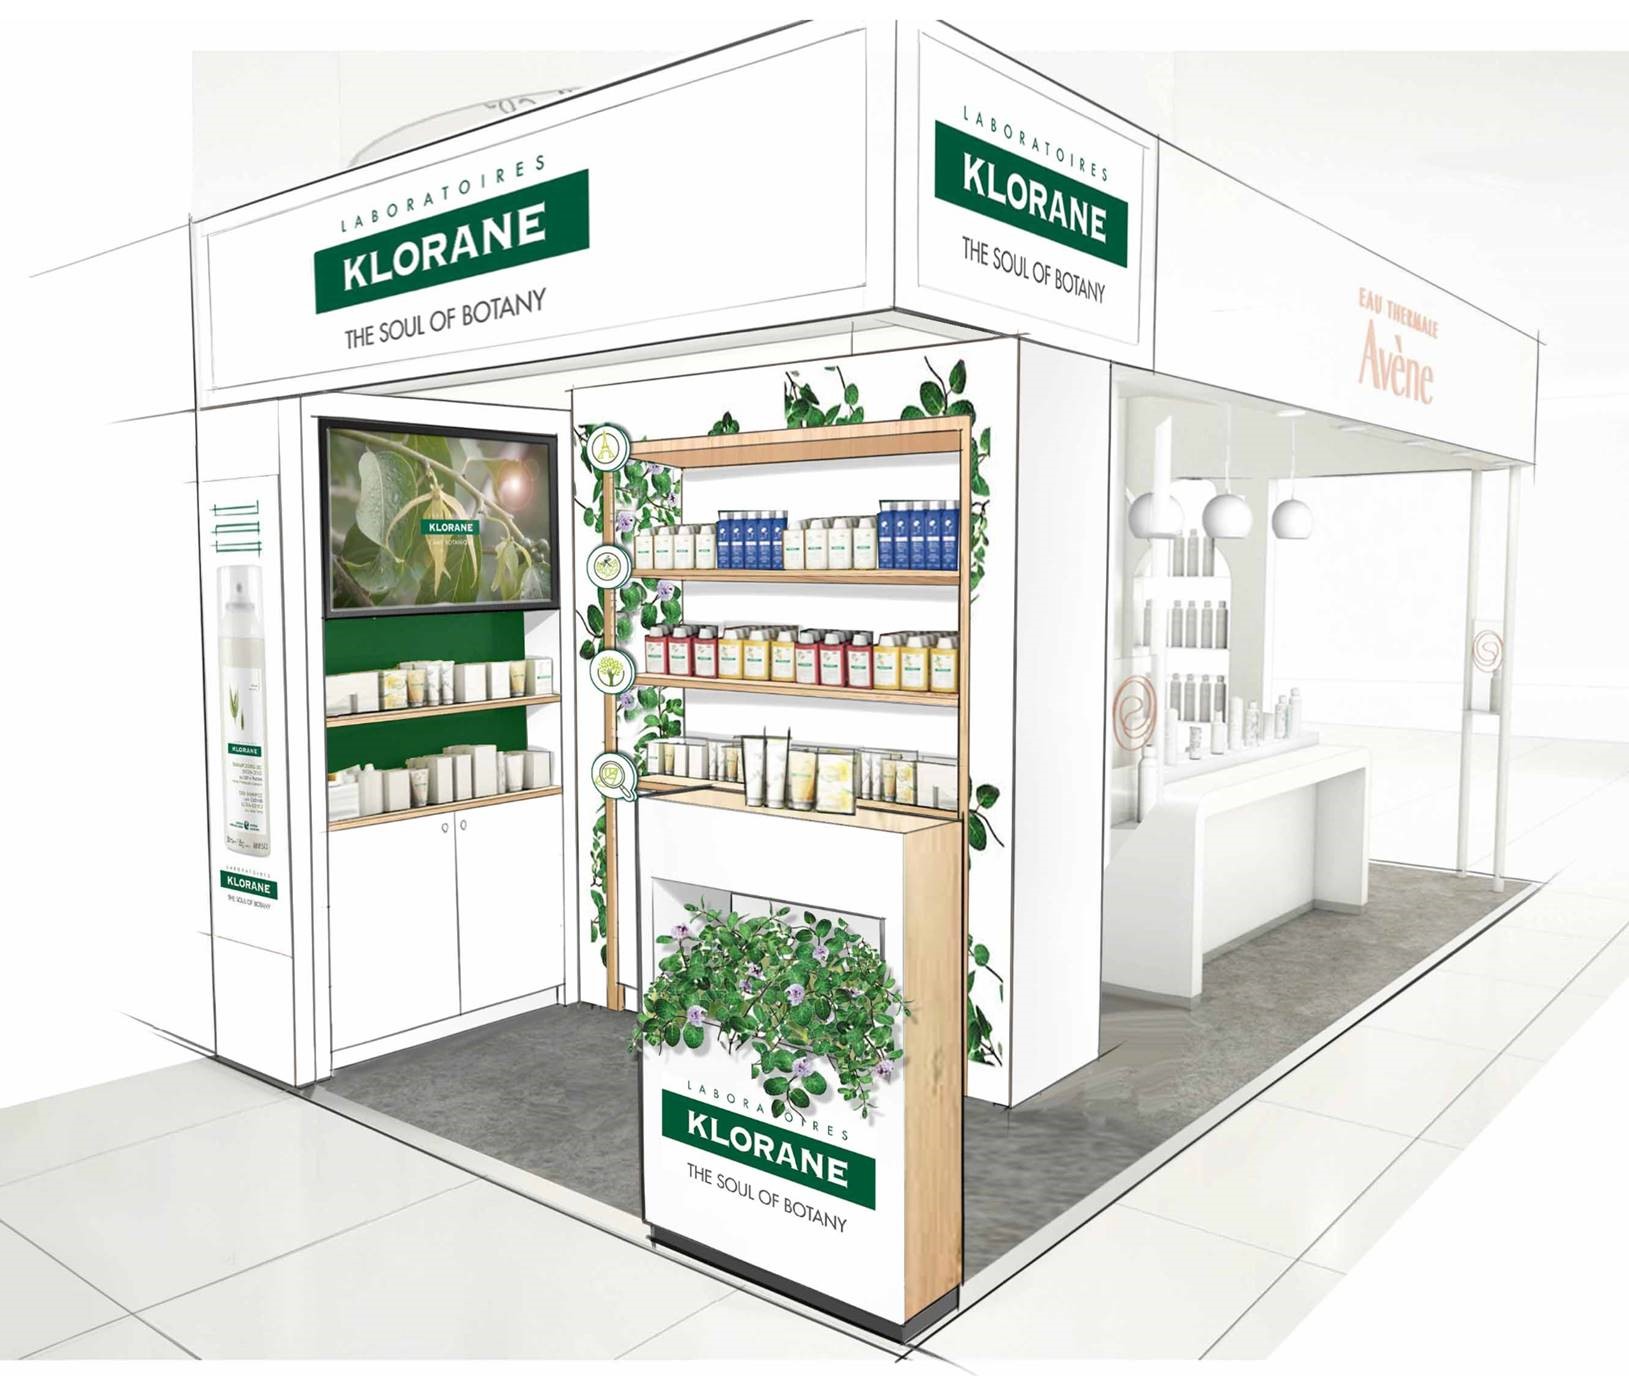 A sketch design of an expo stand for brand Klorane